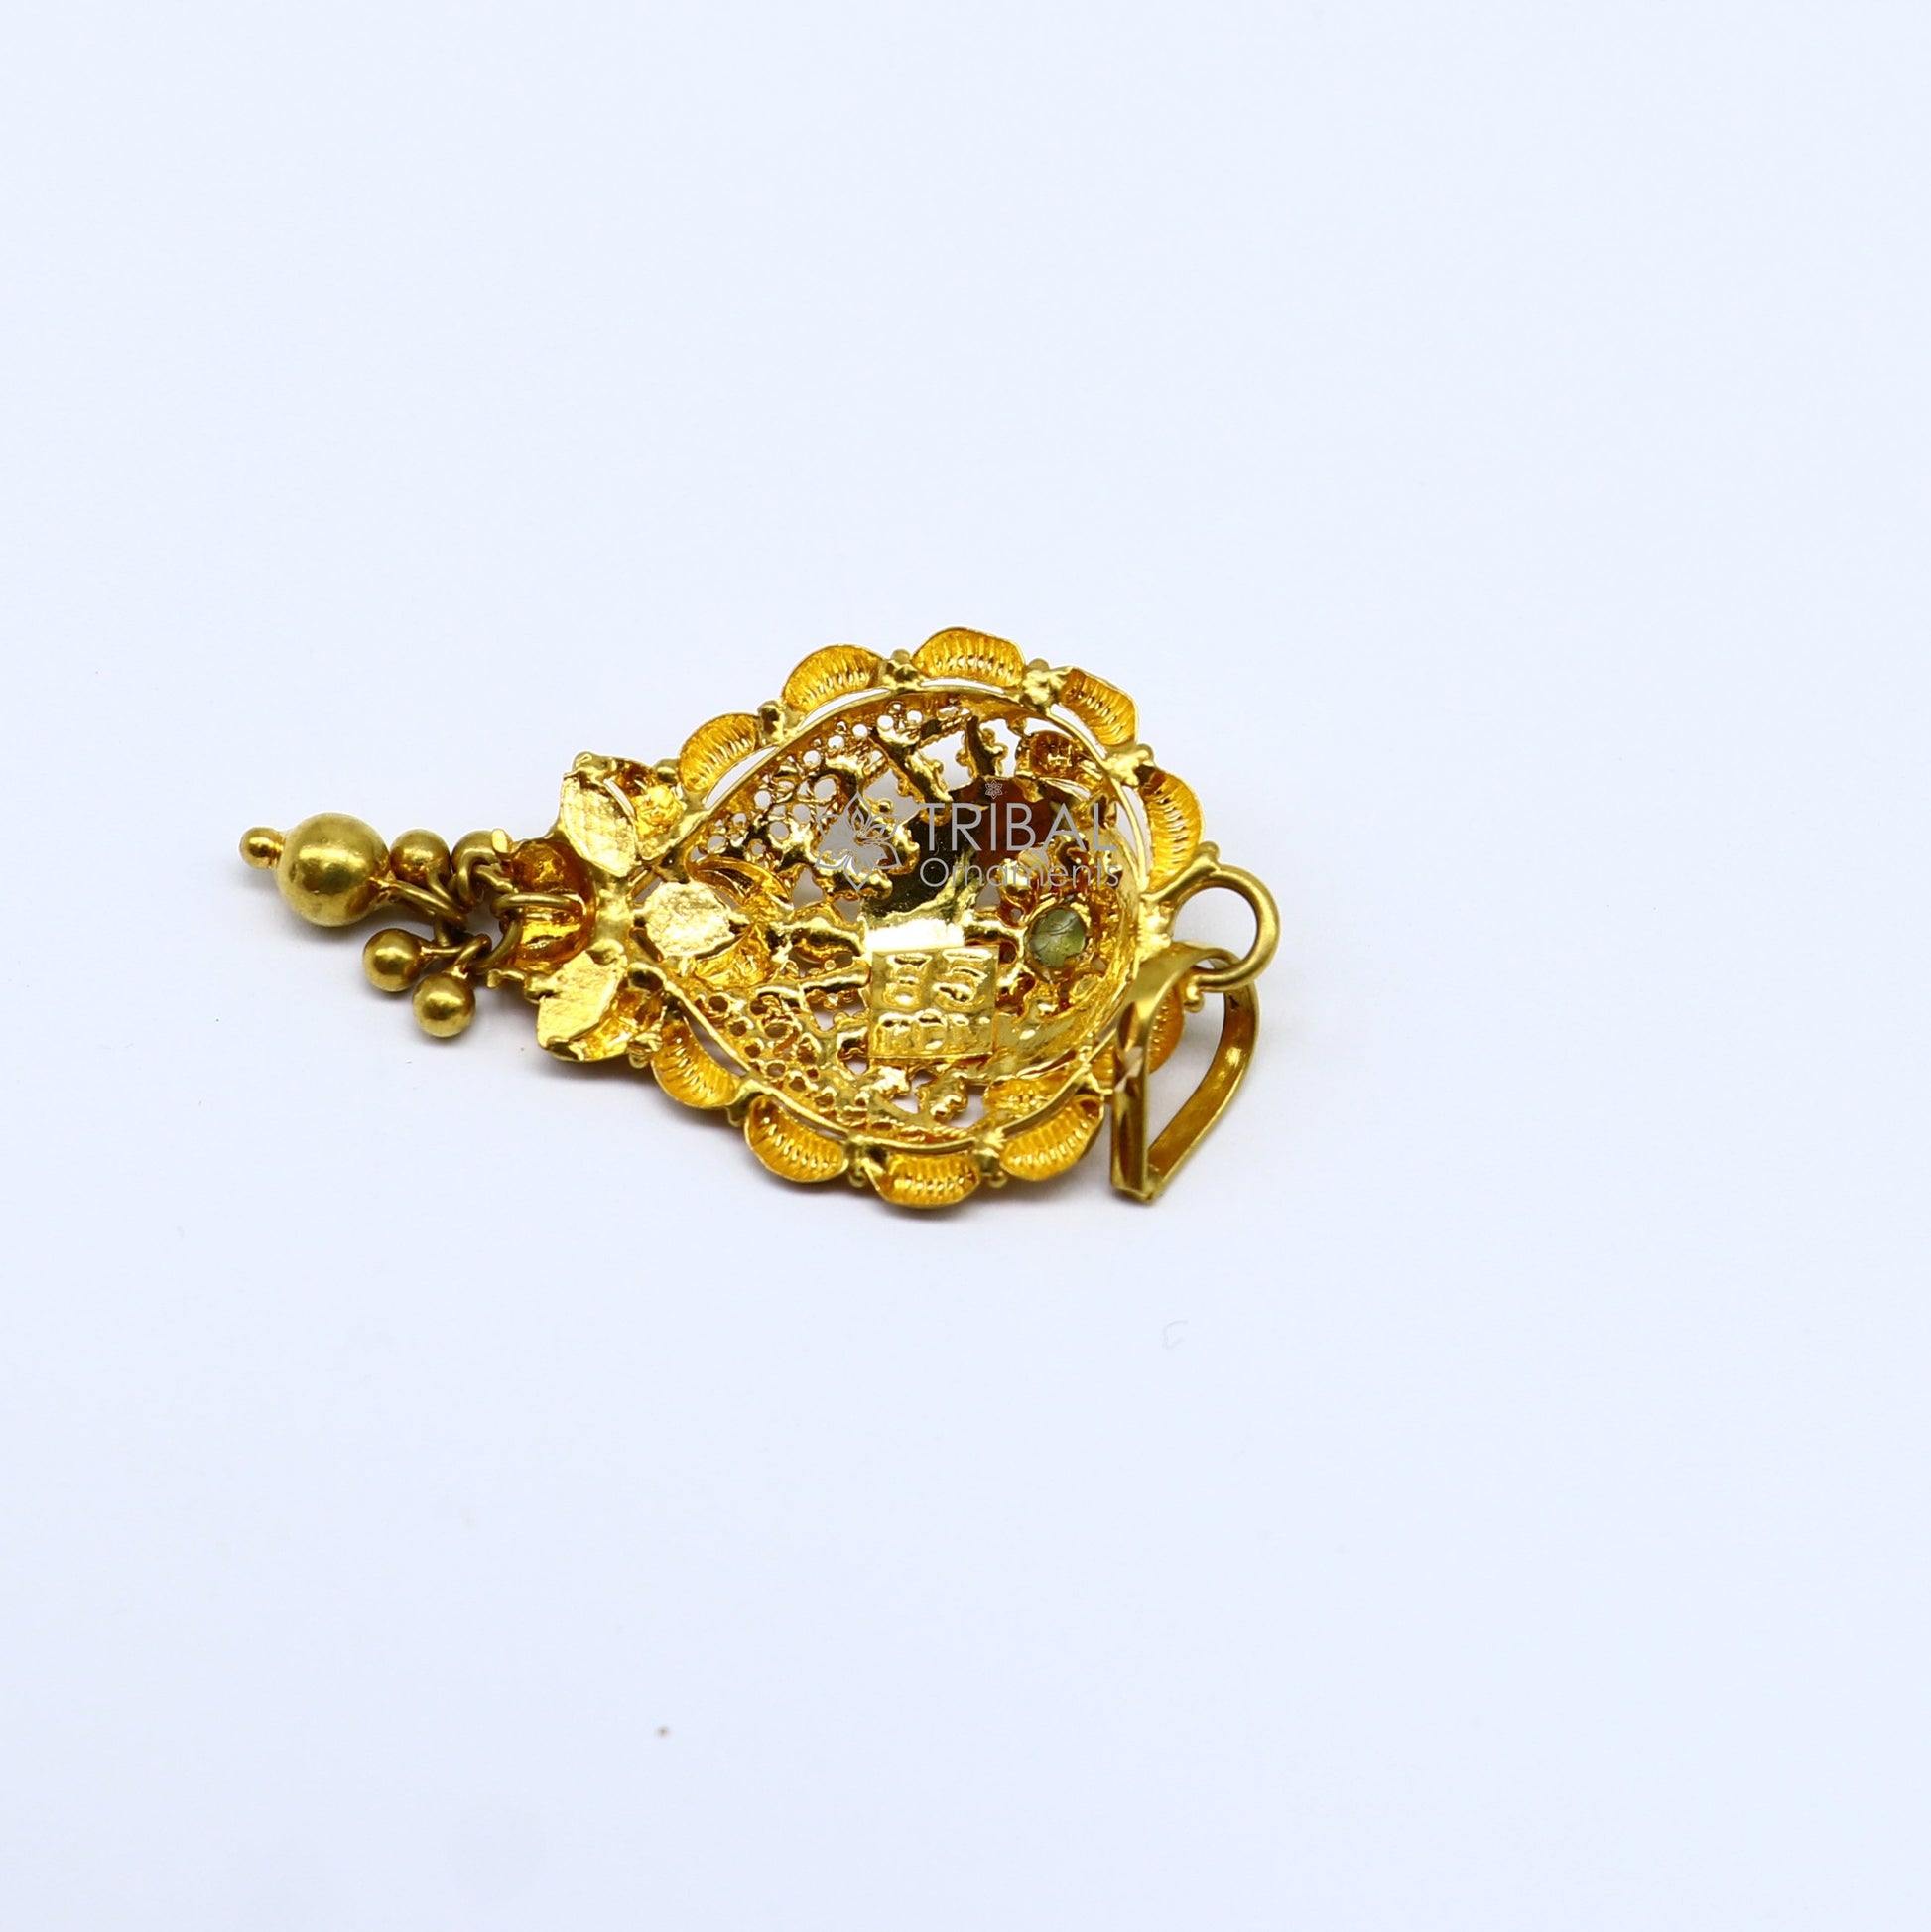 Floral design Traditional cultural filigree work trendy 22kt yellow gold functional pendant, amazing ethnic brides pendant jewelry gp27 - TRIBAL ORNAMENTS